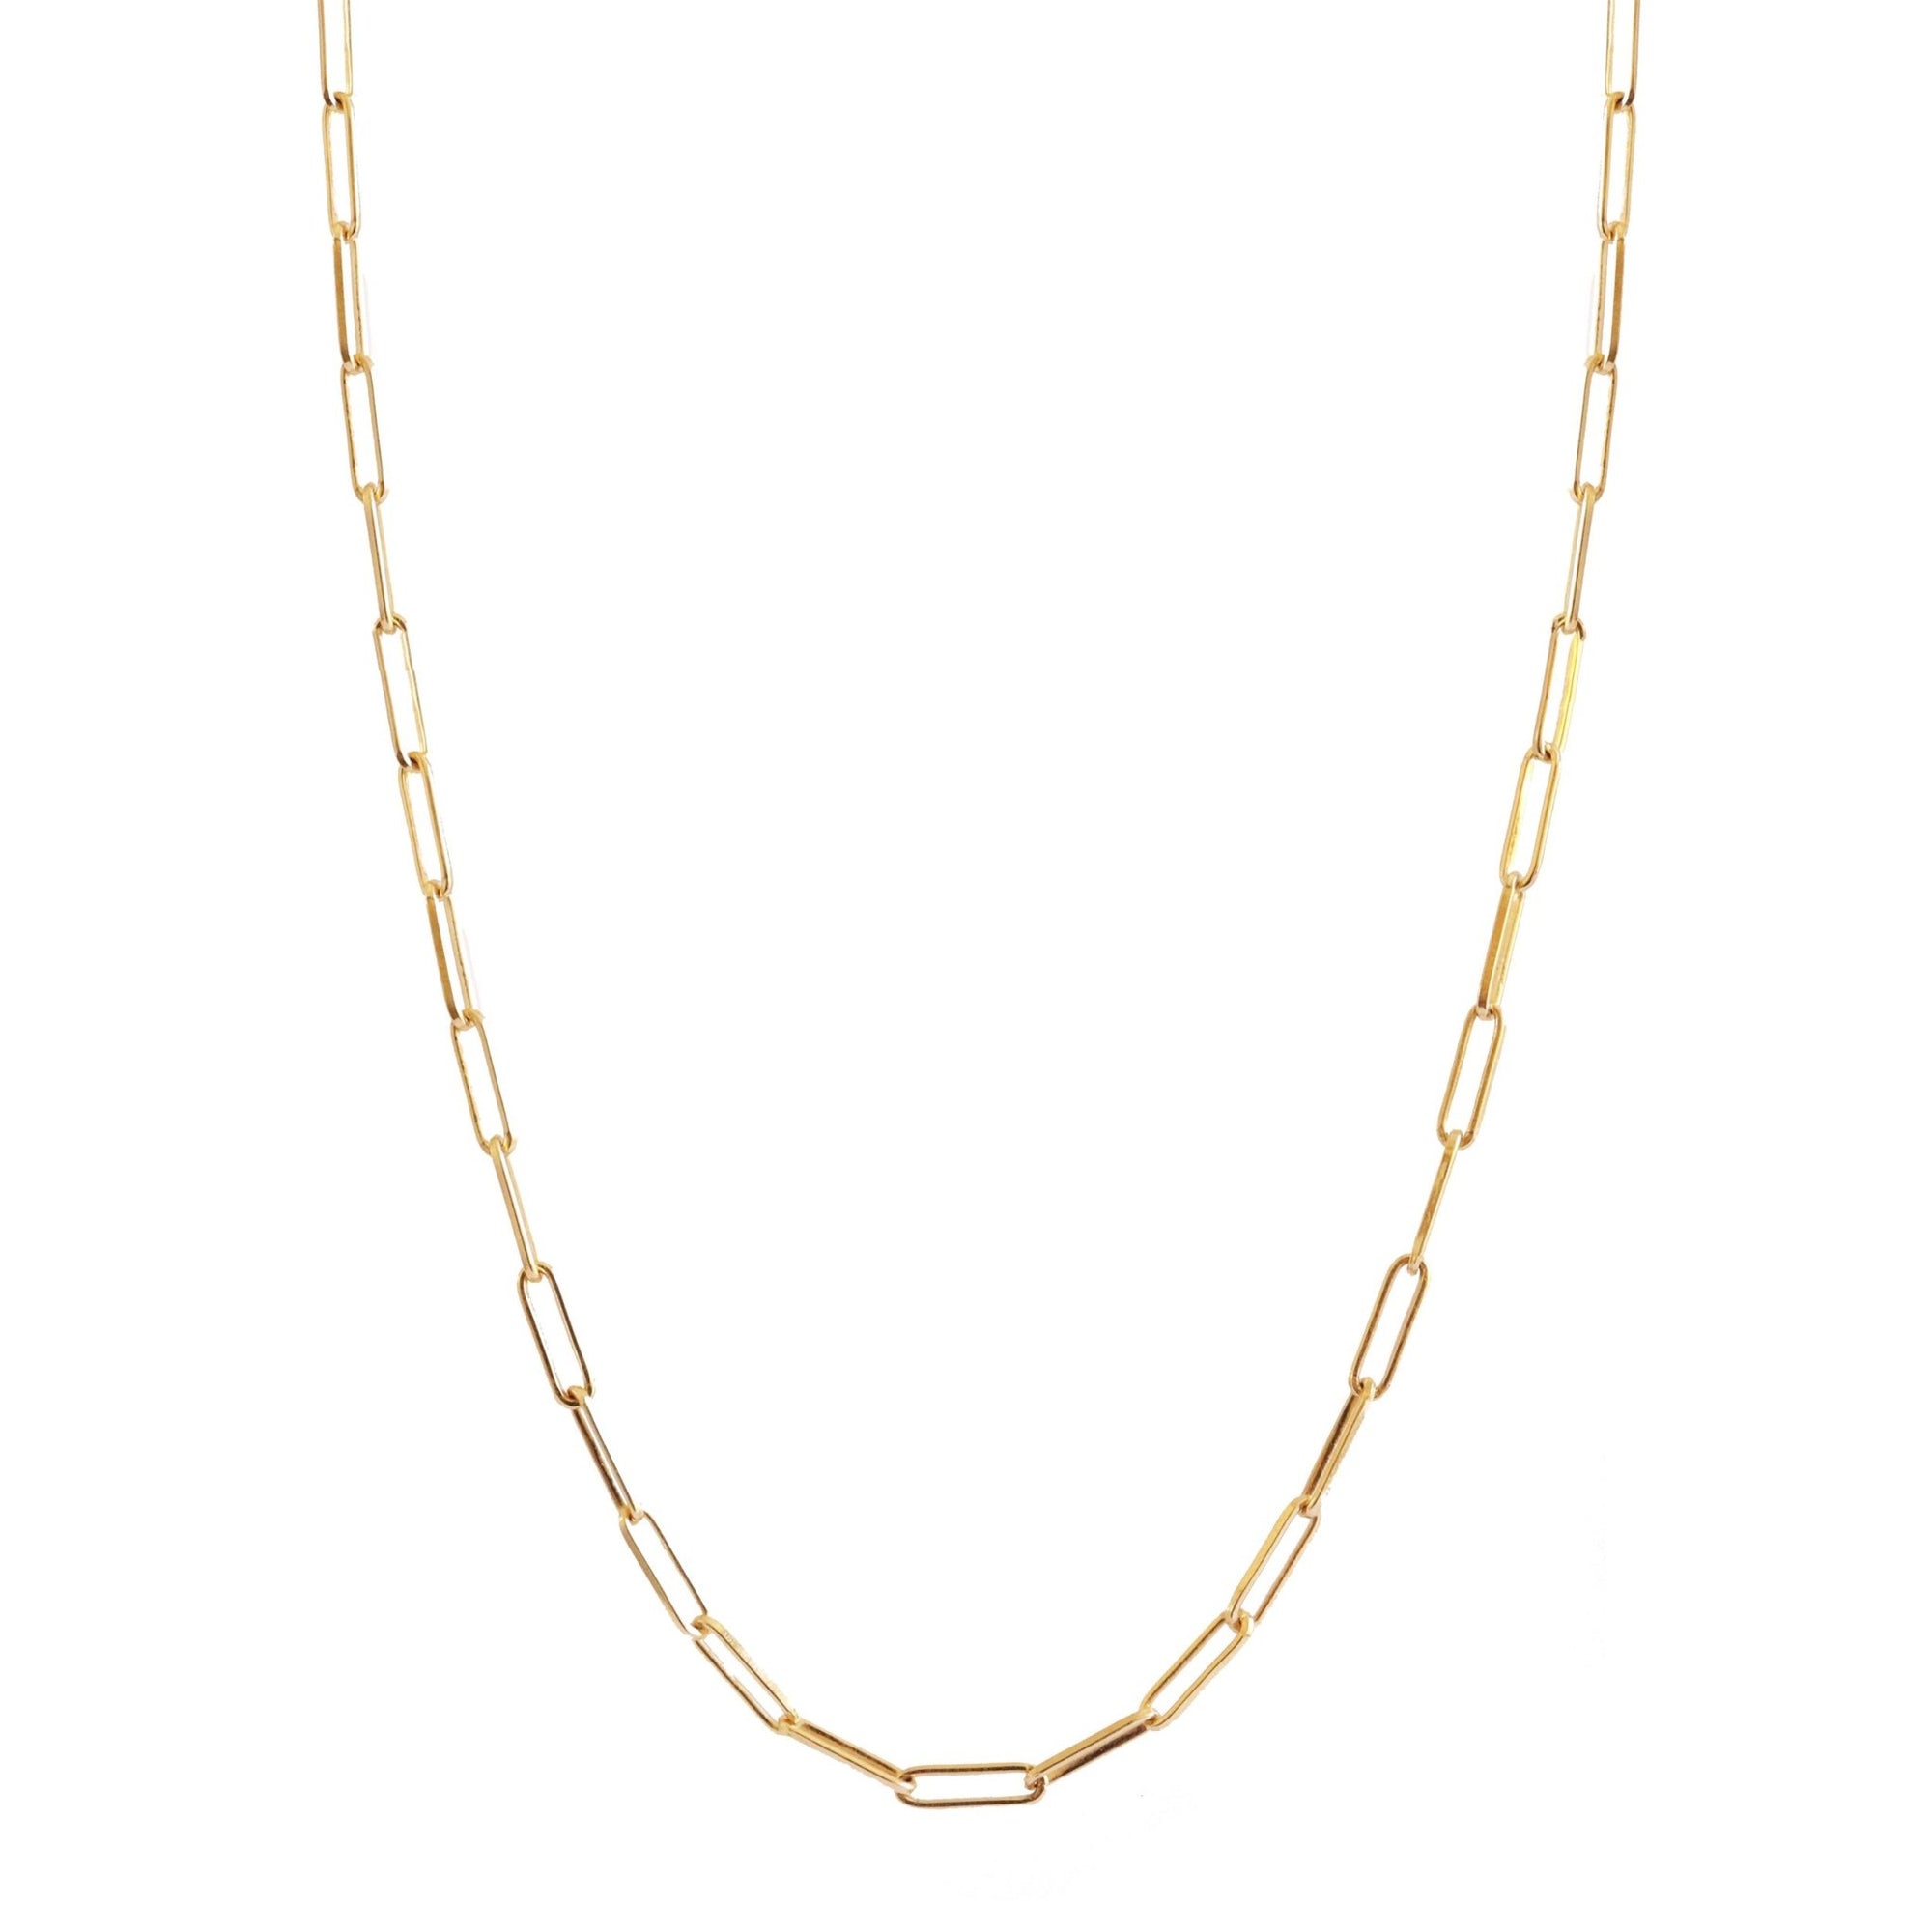 POISE MIDI OVAL LINK NECKLACE - GOLD 24" - SO PRETTY CARA COTTER